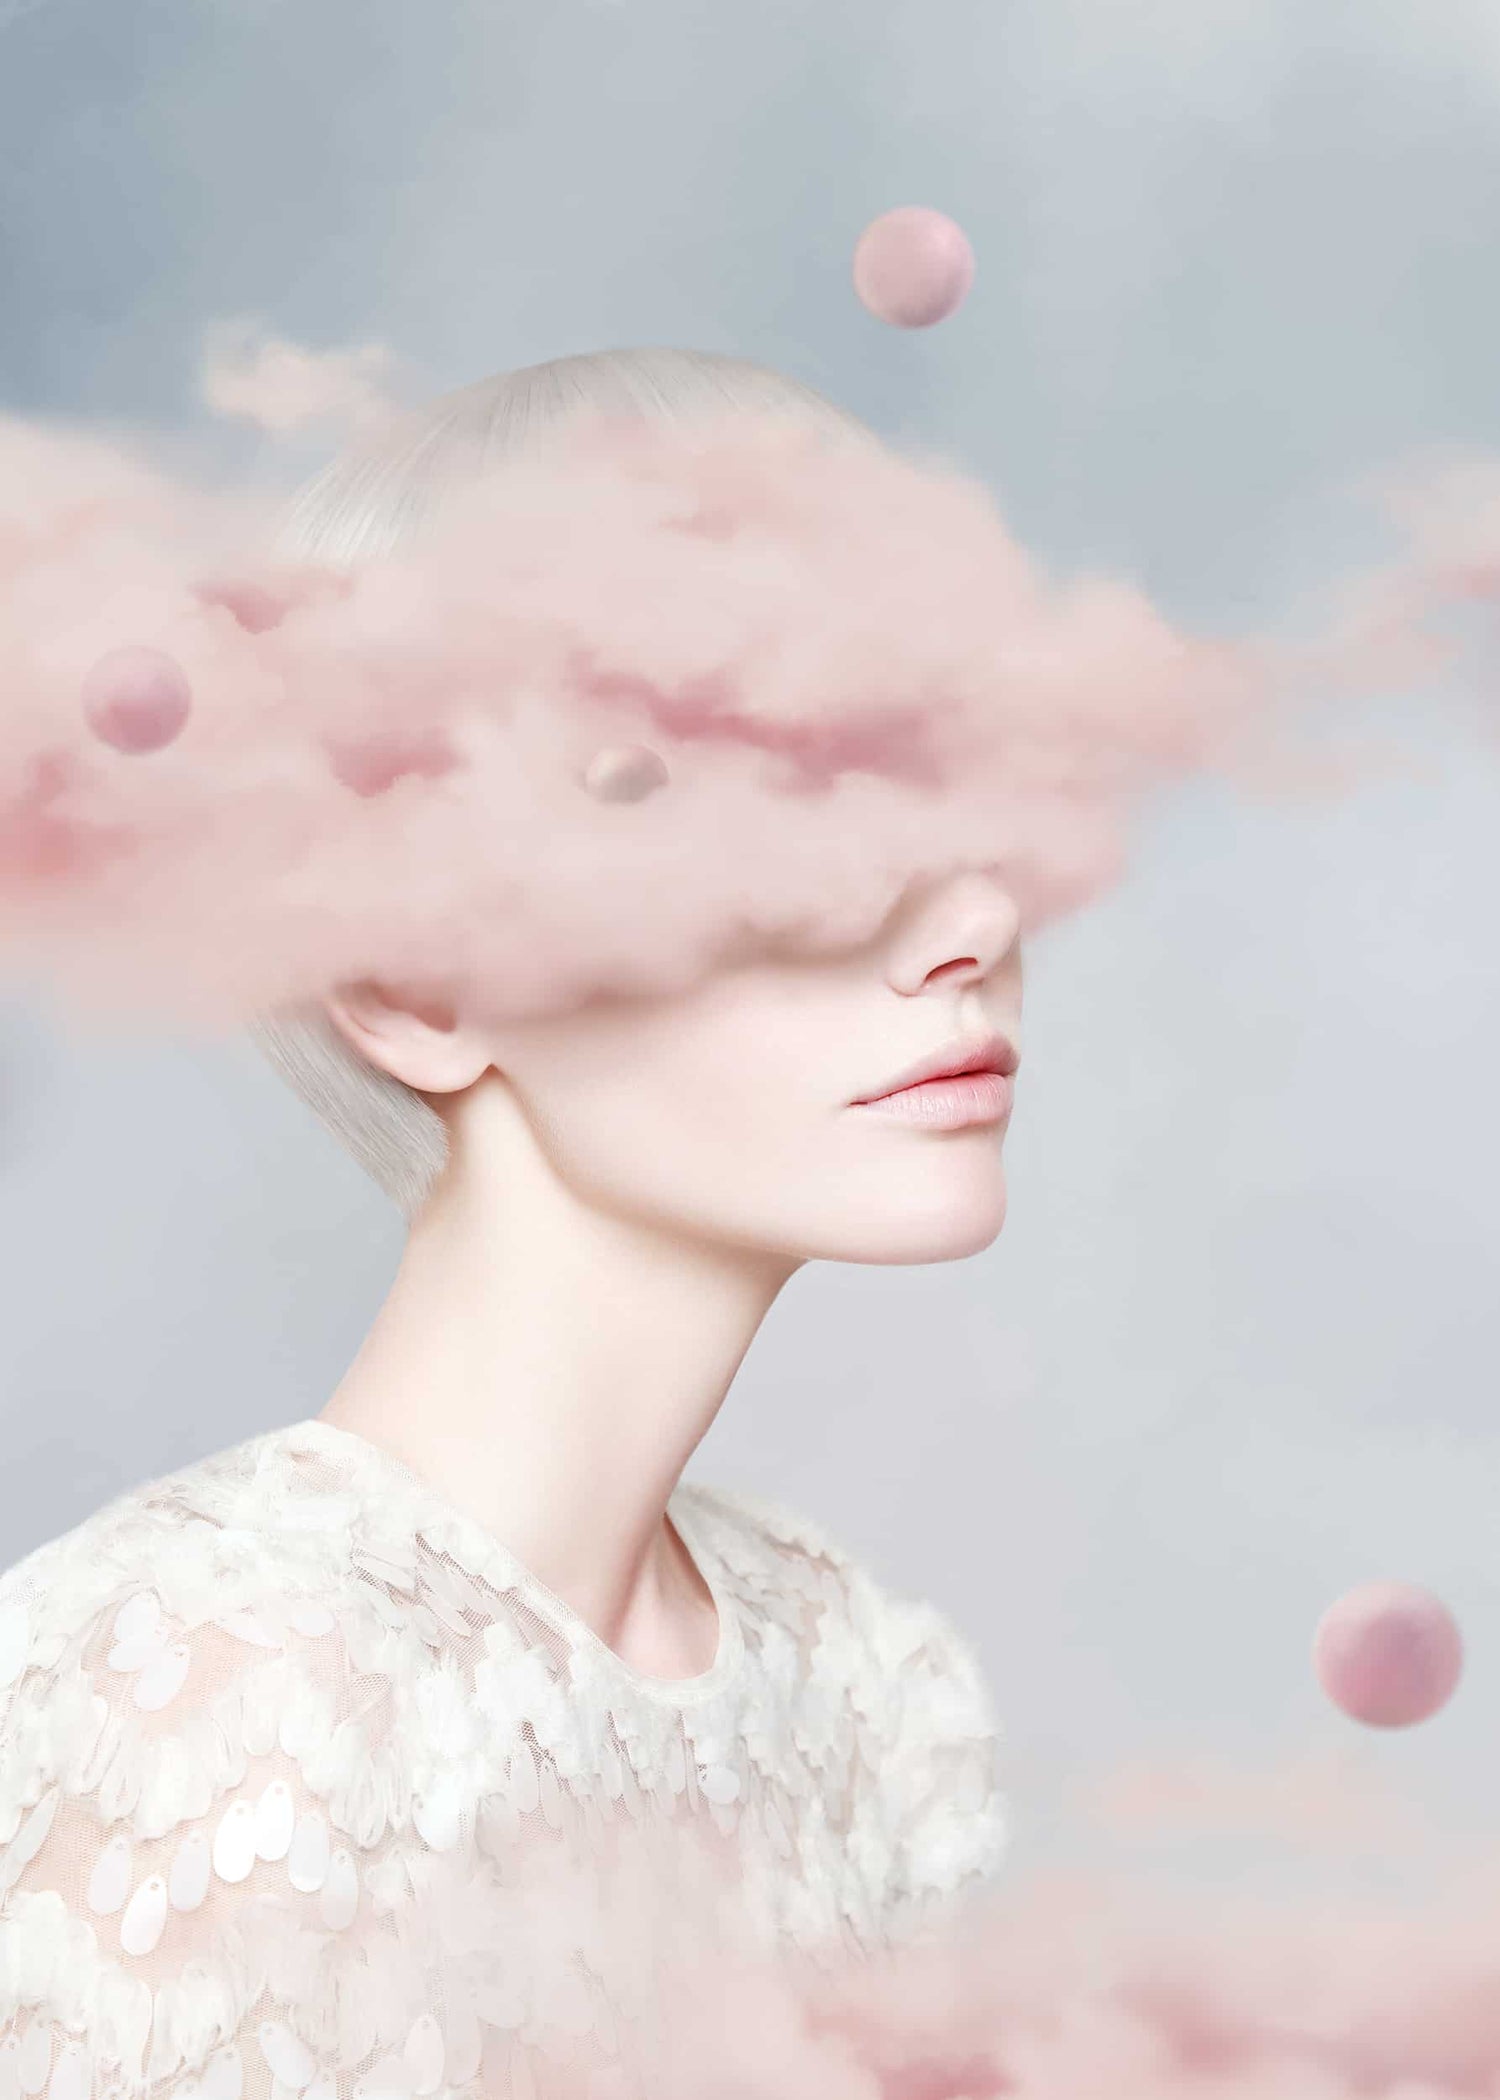 The artpiece 'Confusion' by Yang Han shows a woman whose head is disappearing in a cloud. Leaving her unable to see and orient herself.